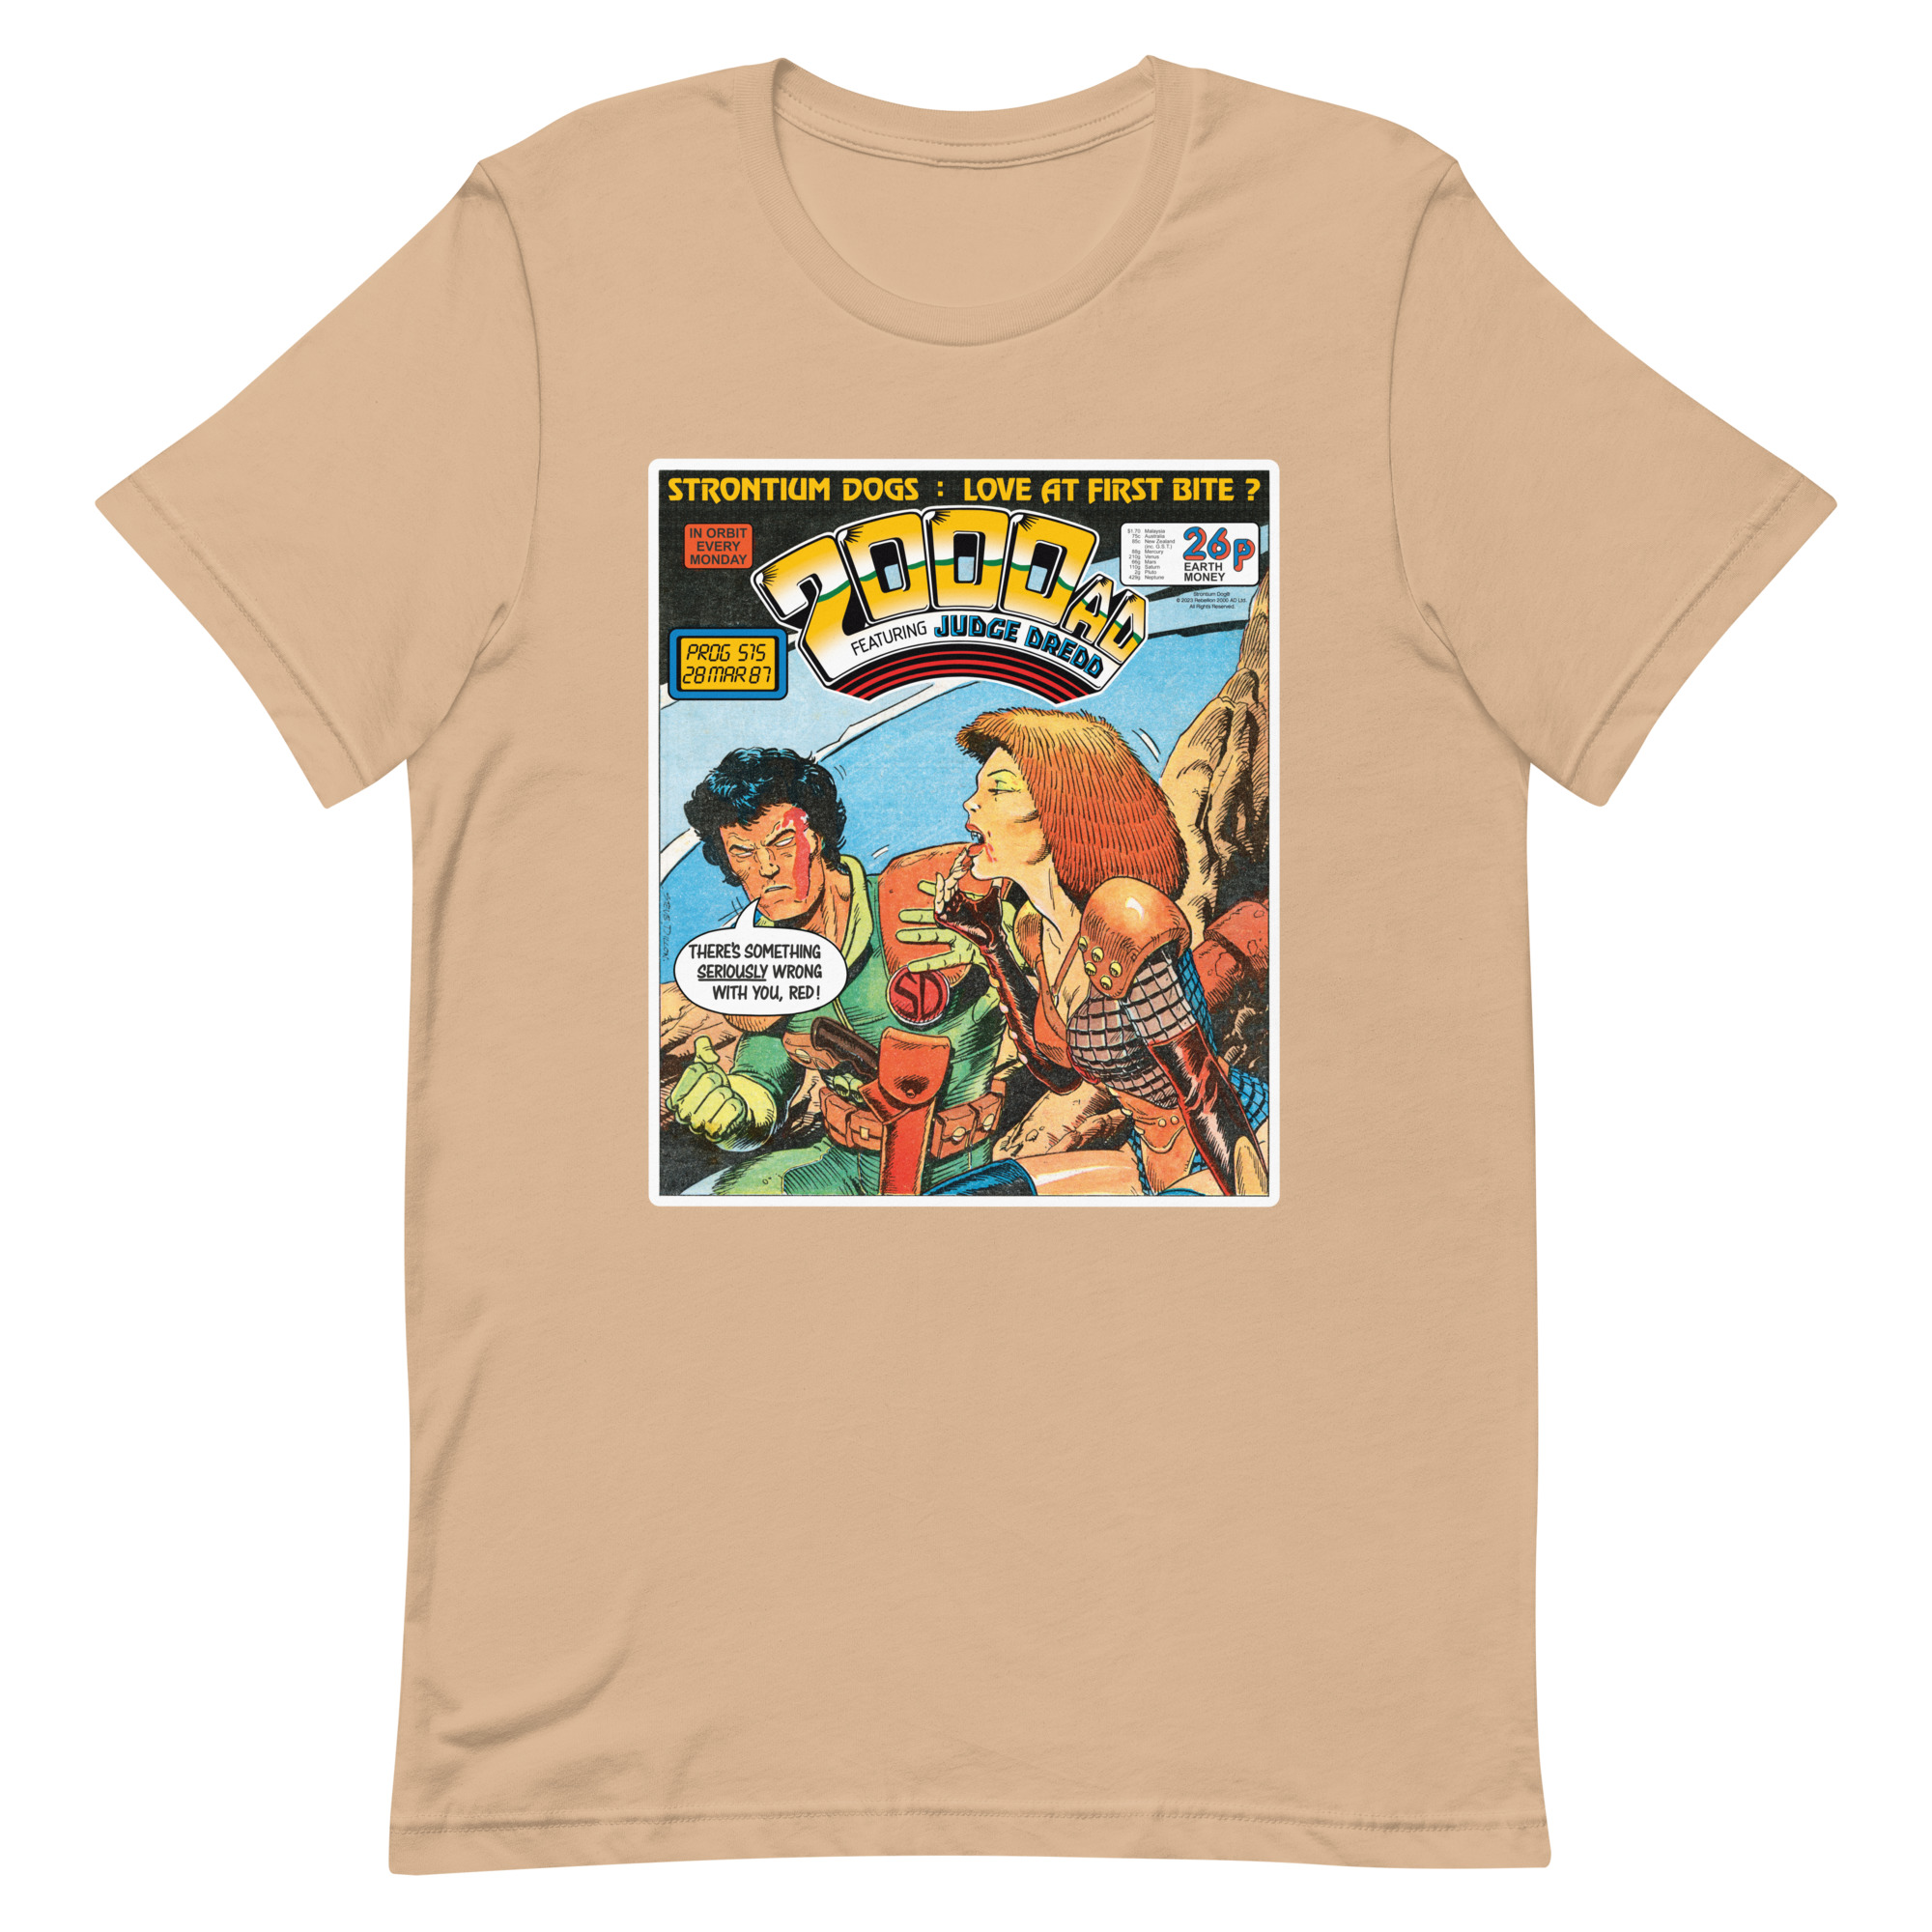 Beige Tshirt with a 'Classic' 2000 AD Cover image on the chest. In the image Strontium Dog judges Durham Reds.... appetite (For Blood)